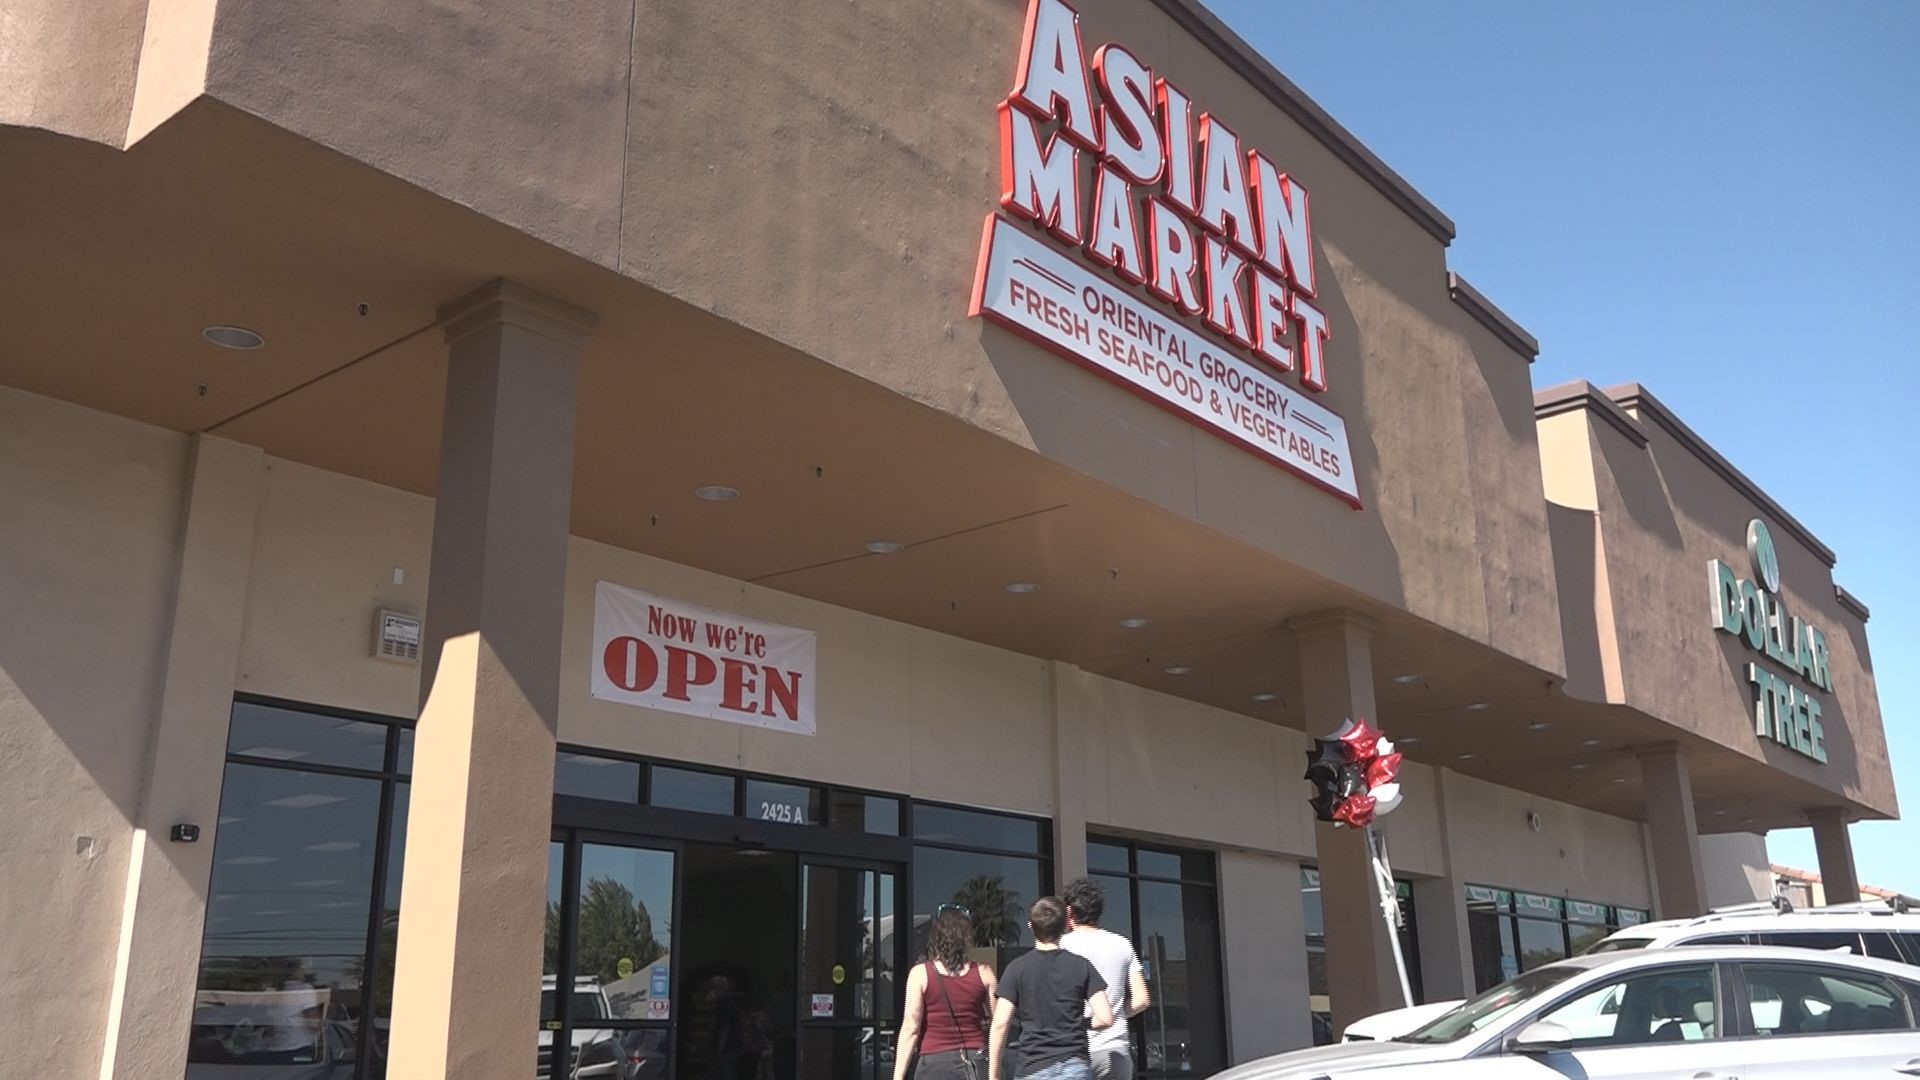 The market was so packed with anxious shoppers on its grand opening Sunday that the family decided to keep it open until 8 p.m., two hours past closing time.